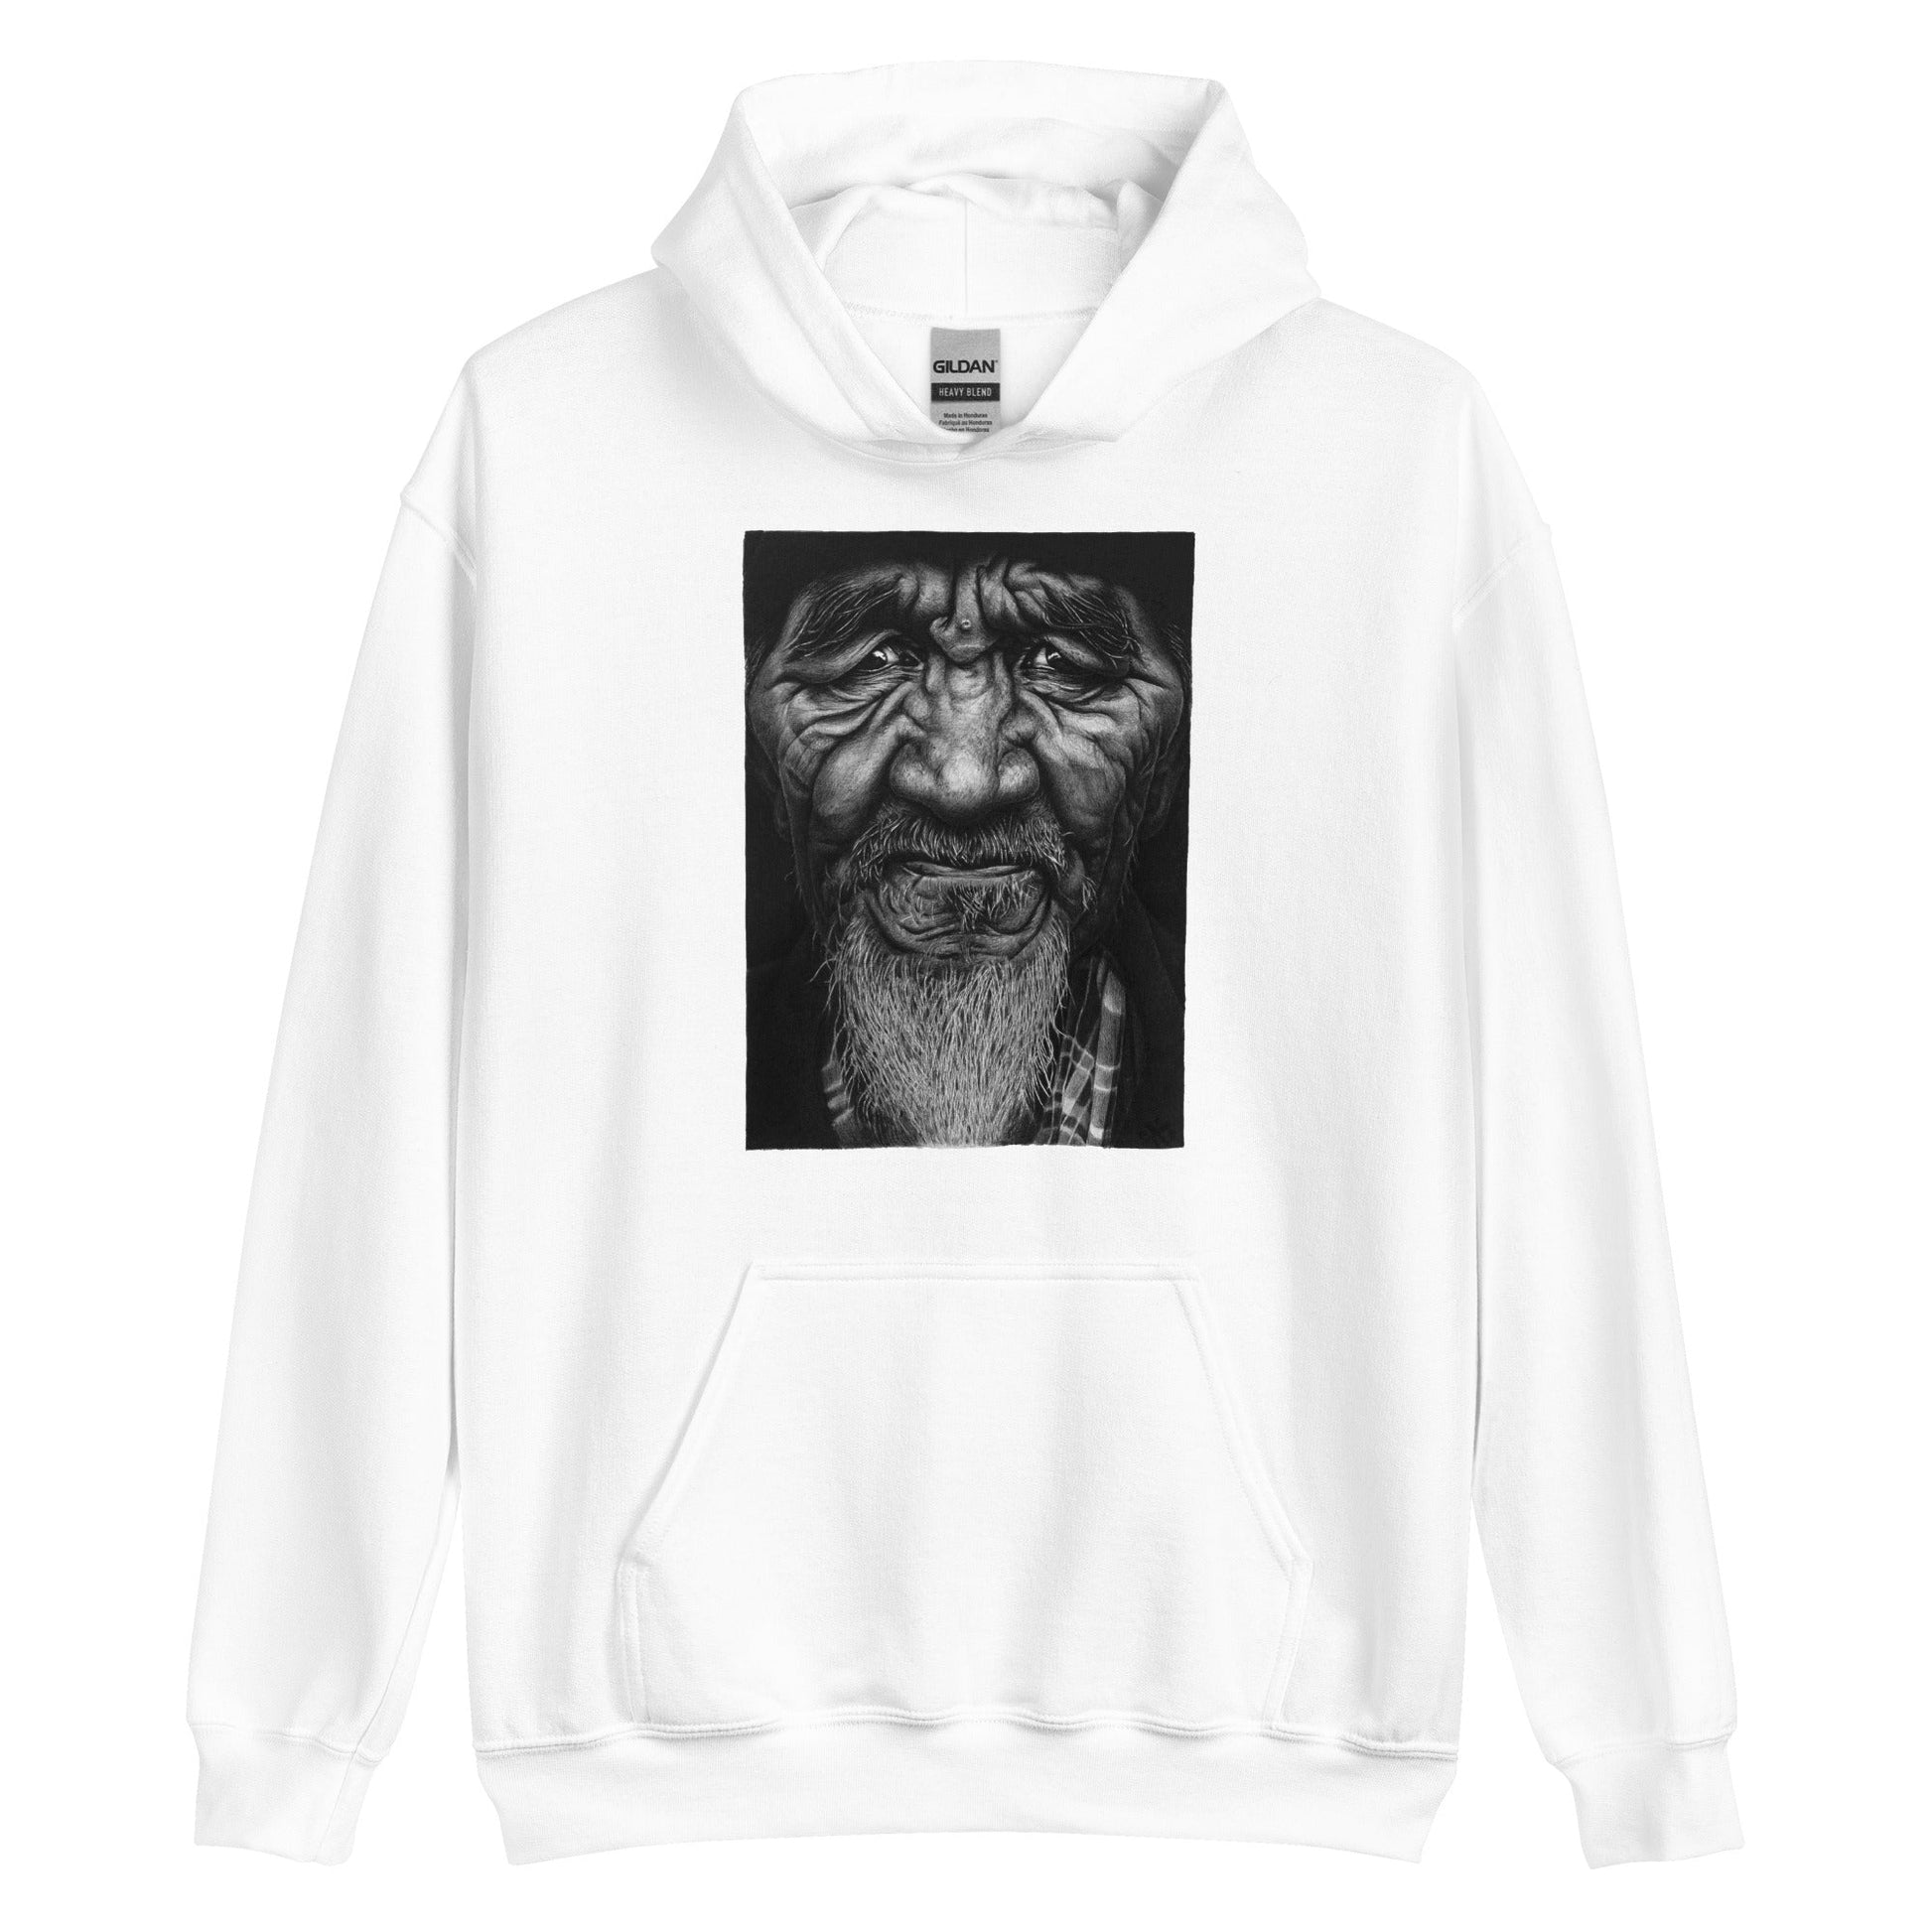 "Windows to the soul" - The Exile prison art Print on Demand The Exile Hoodie Small